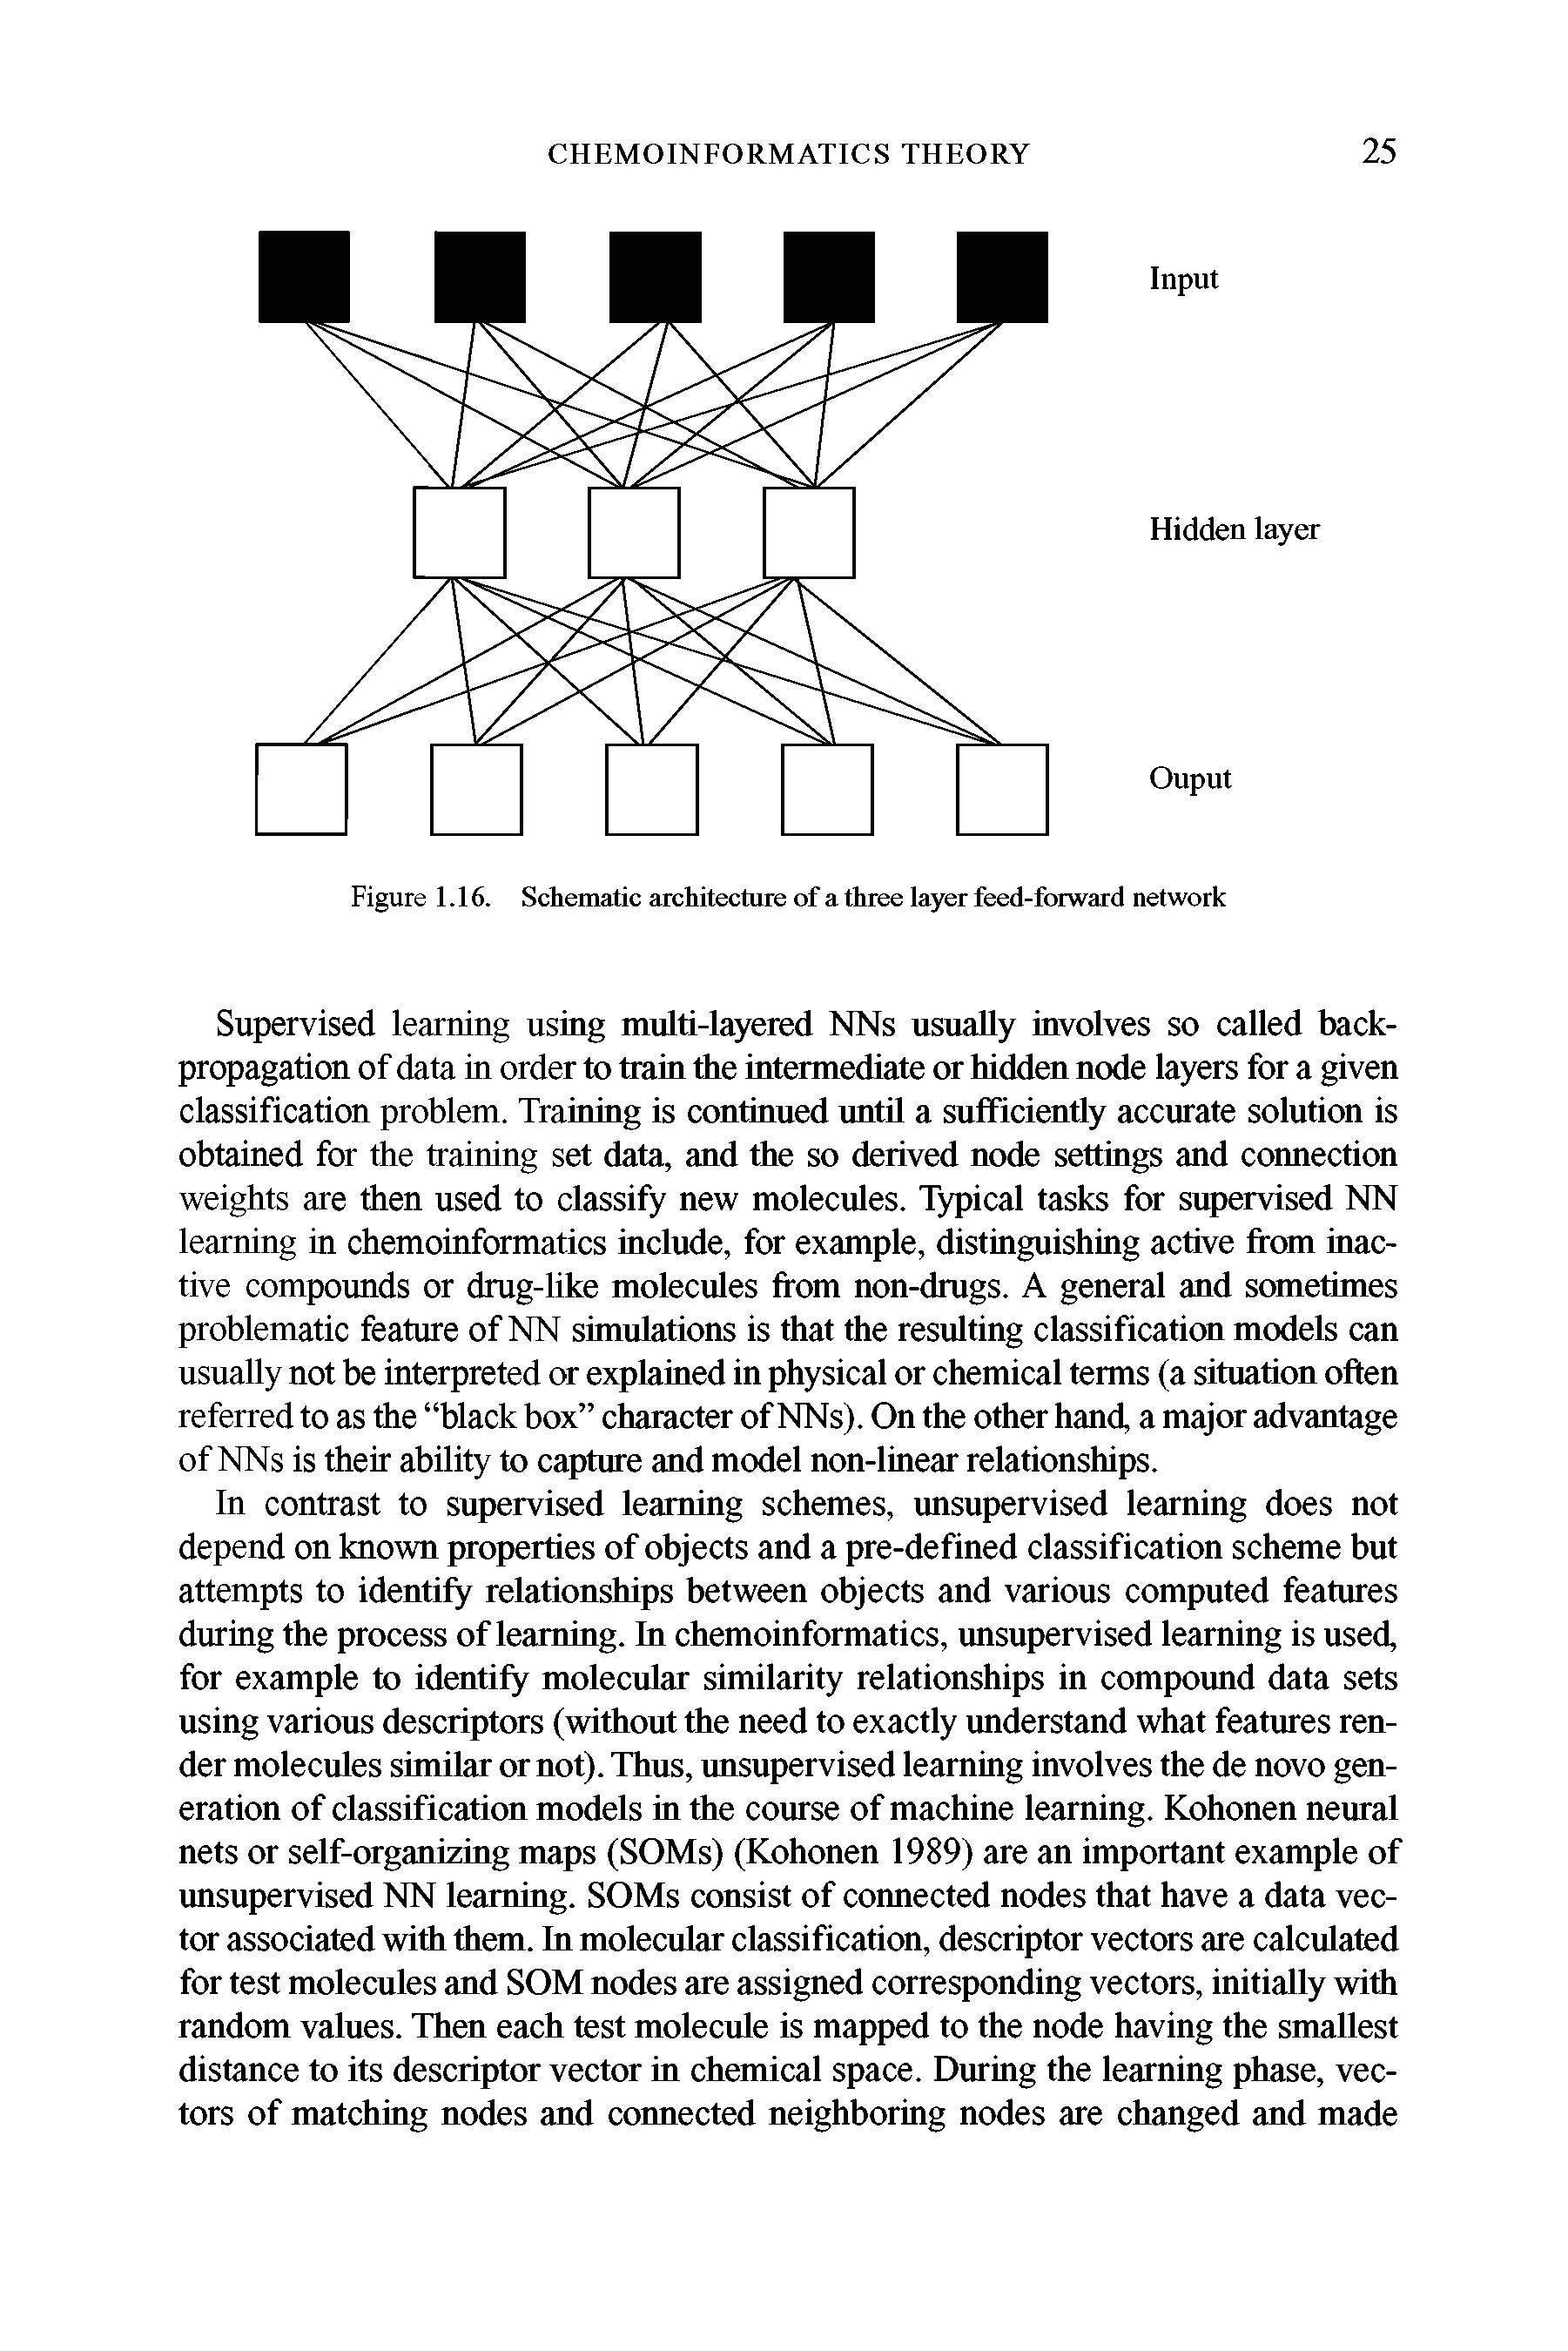 Figure 1.16. Schematic architecture of a three layer feed-forward network...